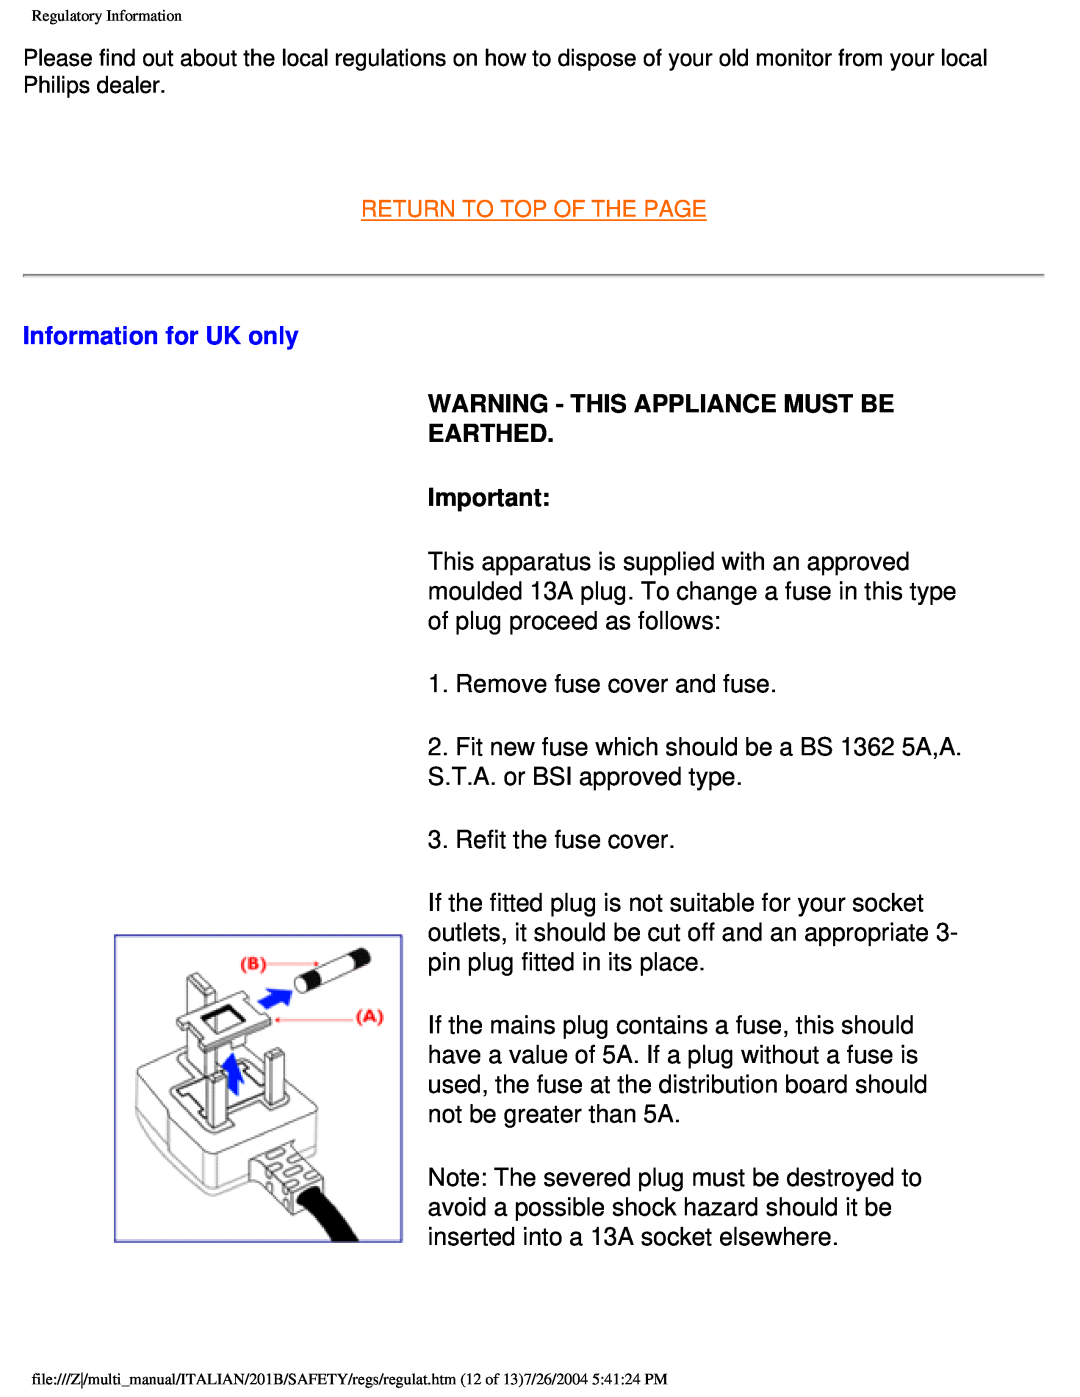 Philips 201B user manual Information for UK only, Warning - This Appliance Must Be Earthed 